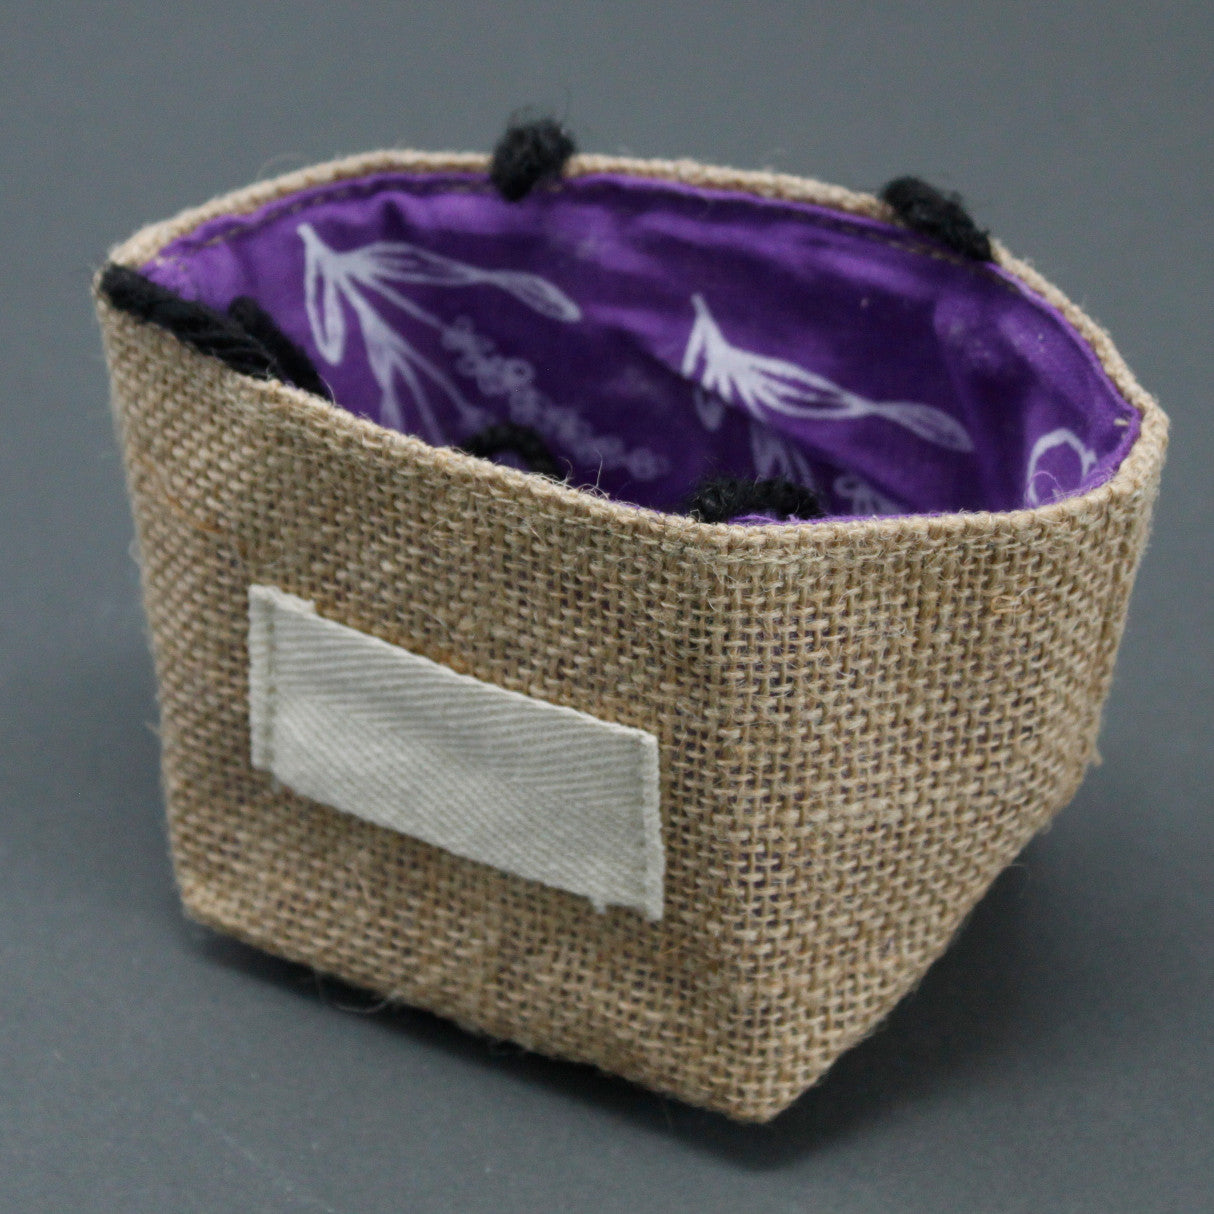 View Natural Jute Cotton Gift Bag Lavender Lining Small information